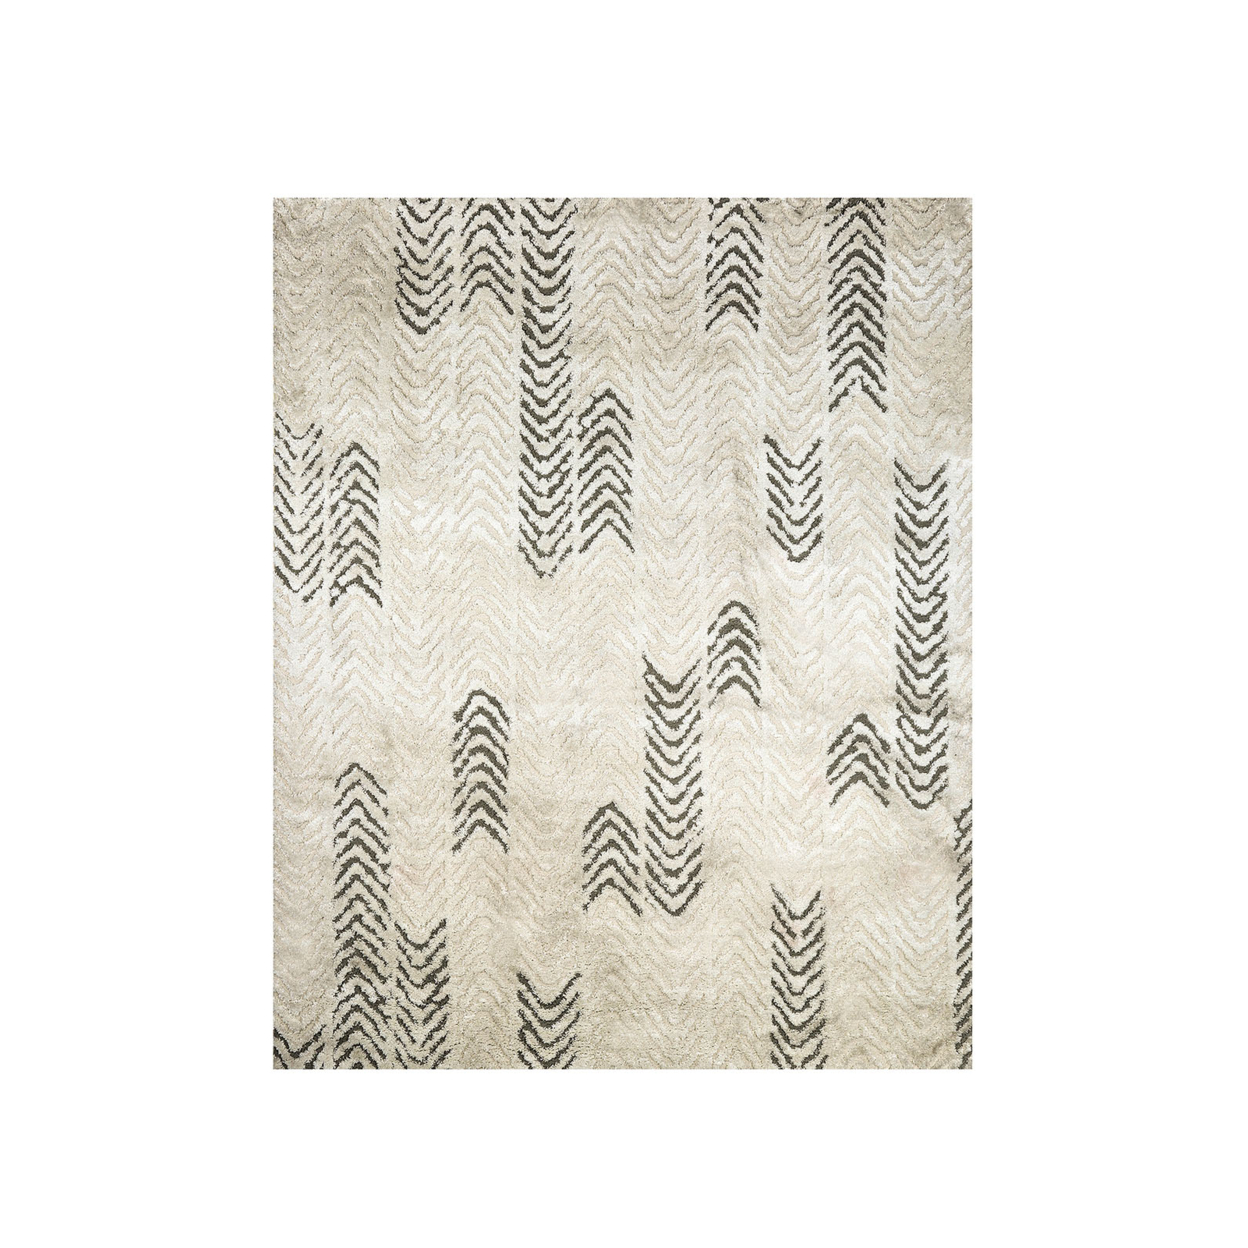 Geometric Patterned Polyester Area Rug With Latex Backing, Beige & Black- Saltoro Sherpi